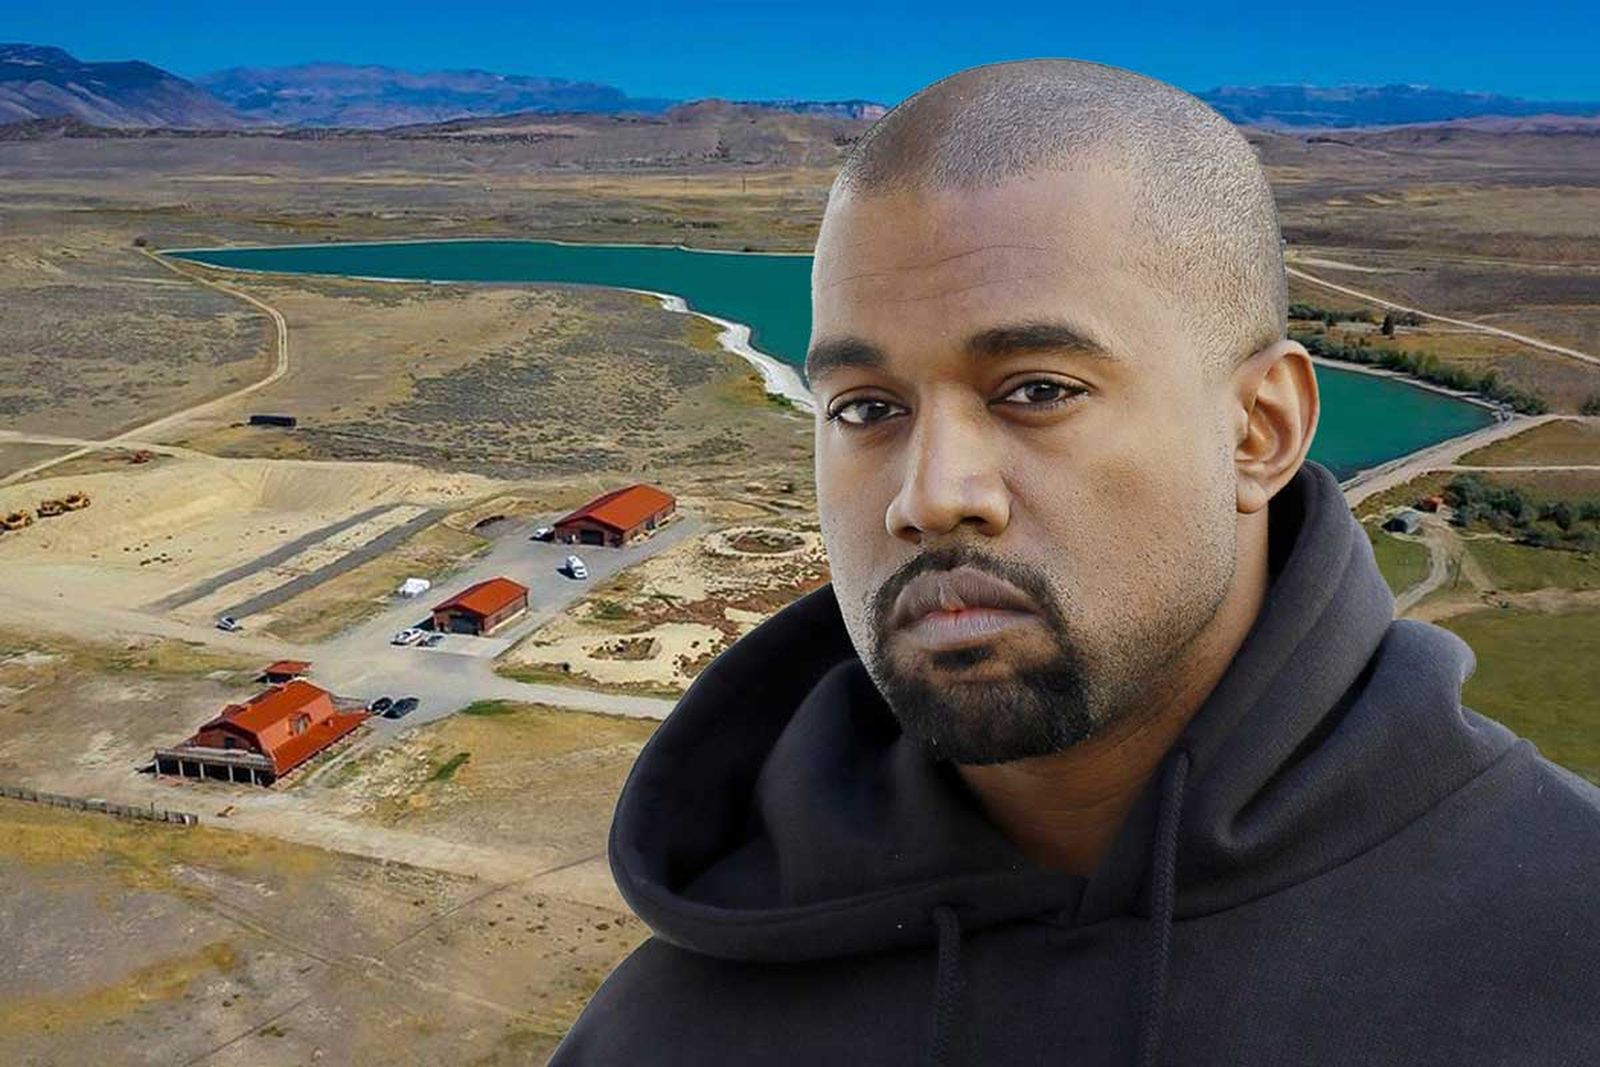 kanye west real estate ranch wyoming home house sale buy price auction tadao ando malibu yeezy shltr